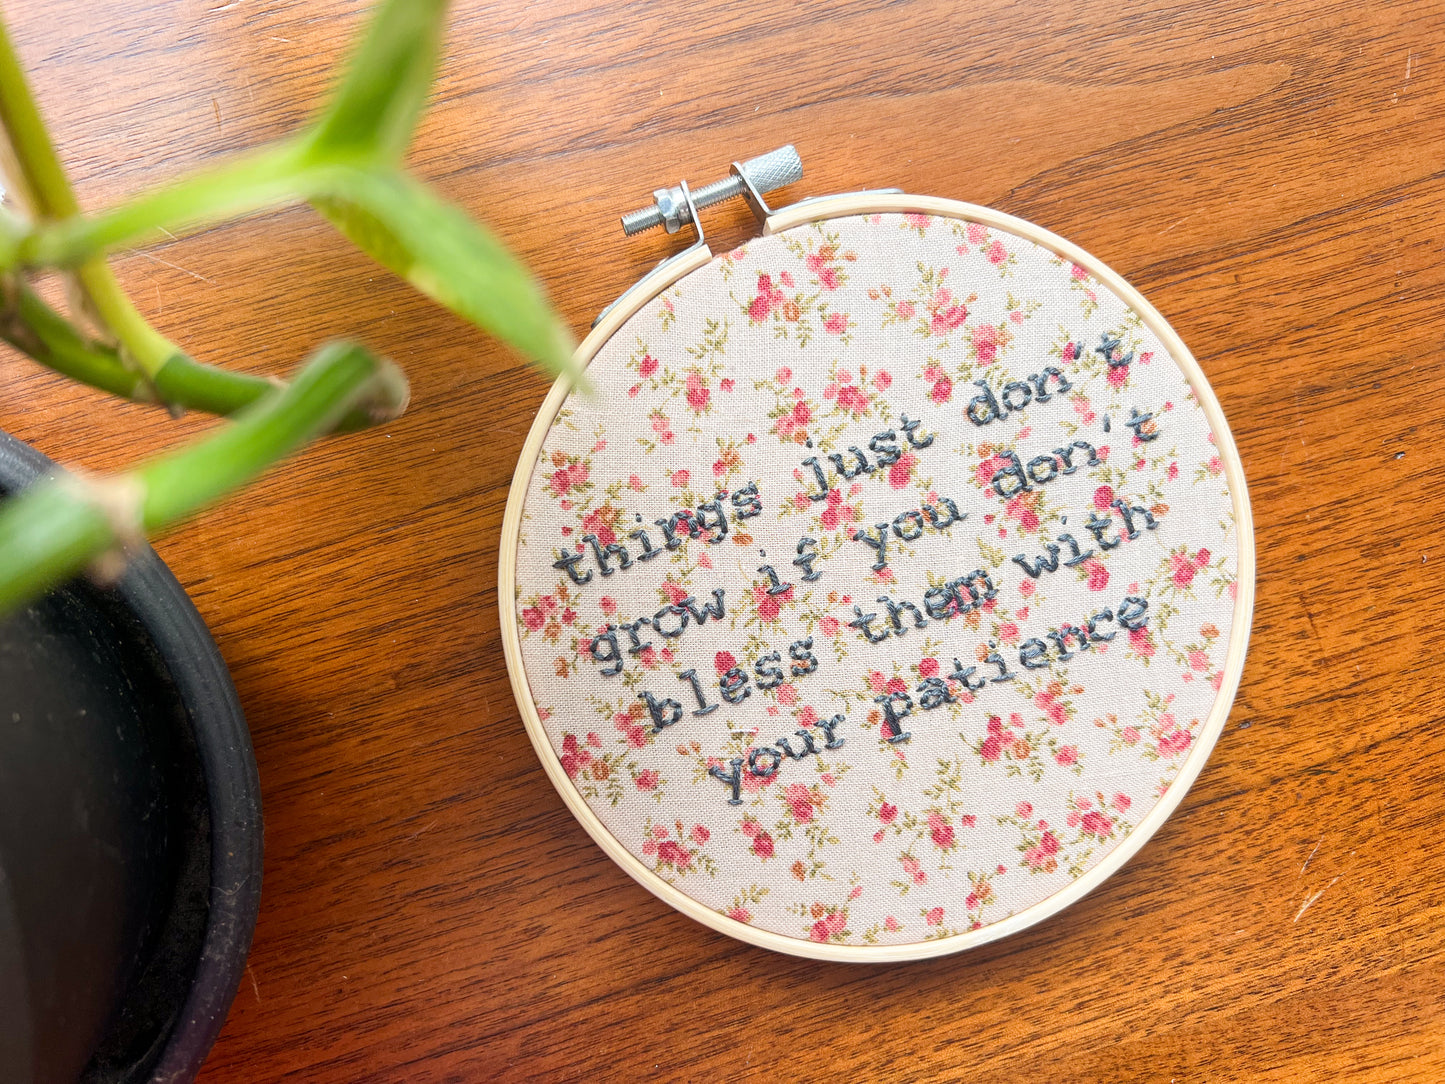 things just don’t grow embroidery hoop